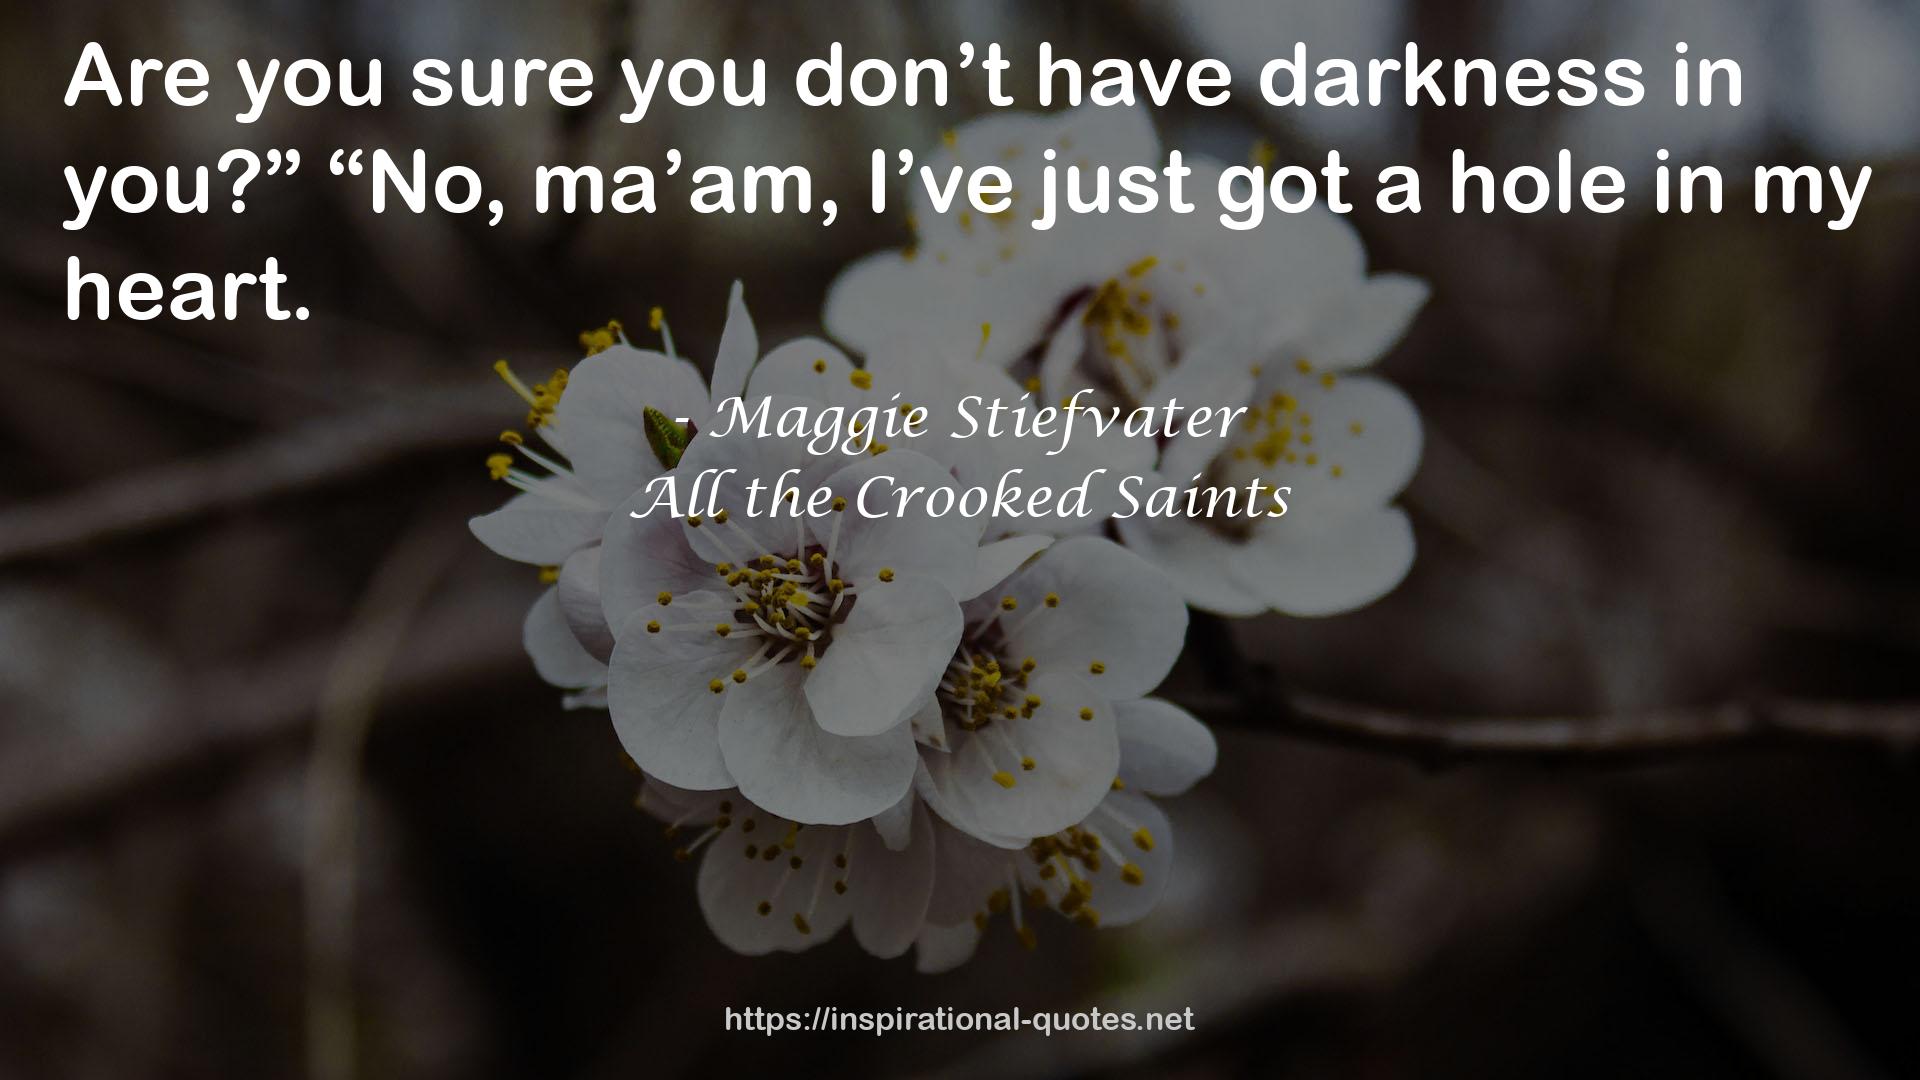 All the Crooked Saints QUOTES